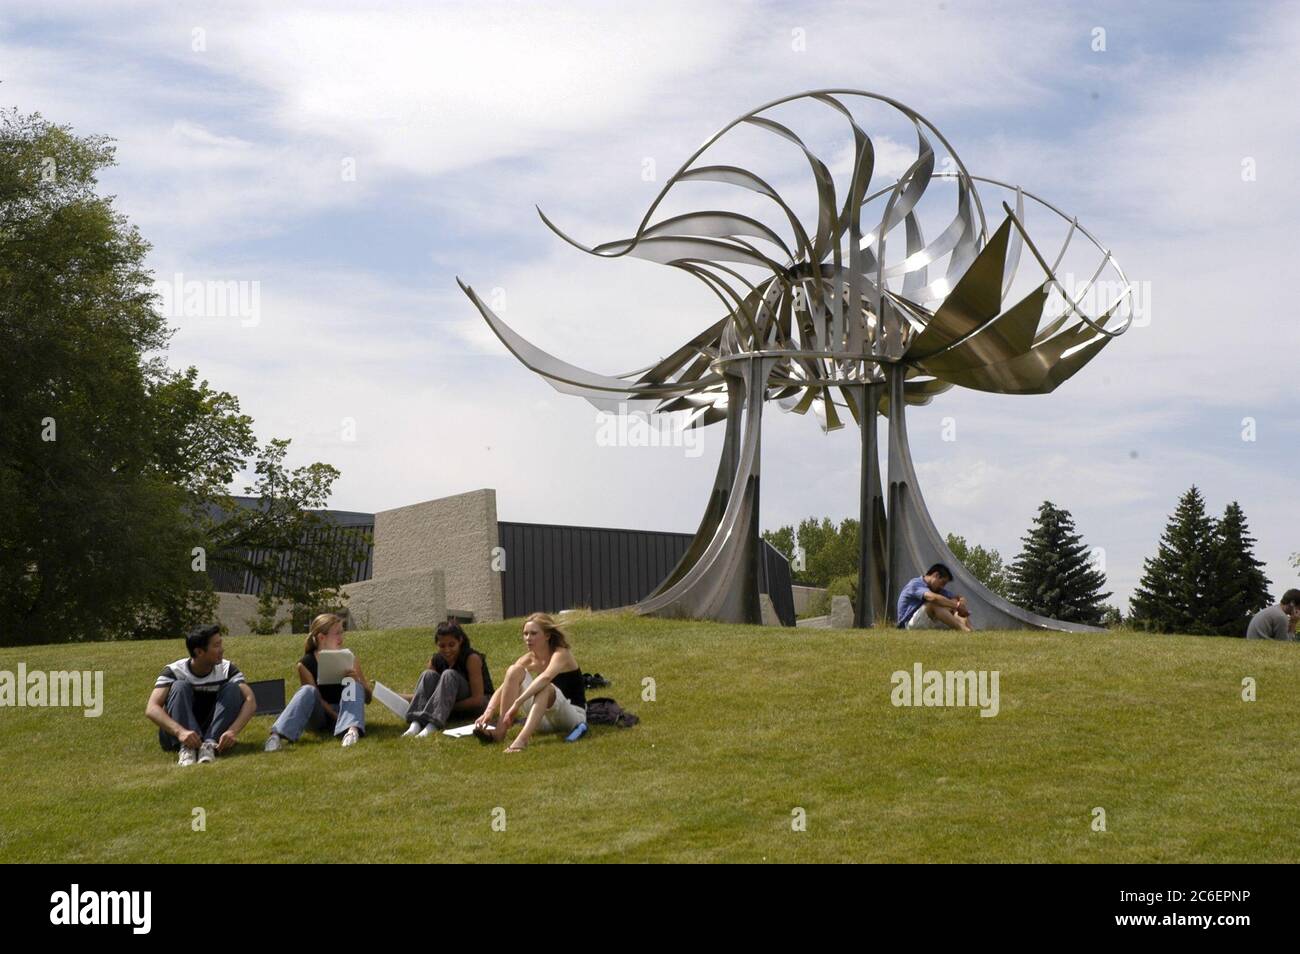 Calgary, Alberta CANADA July 27, 2005: Students lounge in front of outdoor sculpture on the campus of the University of Calgary, Alberta.  ©Bob Daemmrich Stock Photo